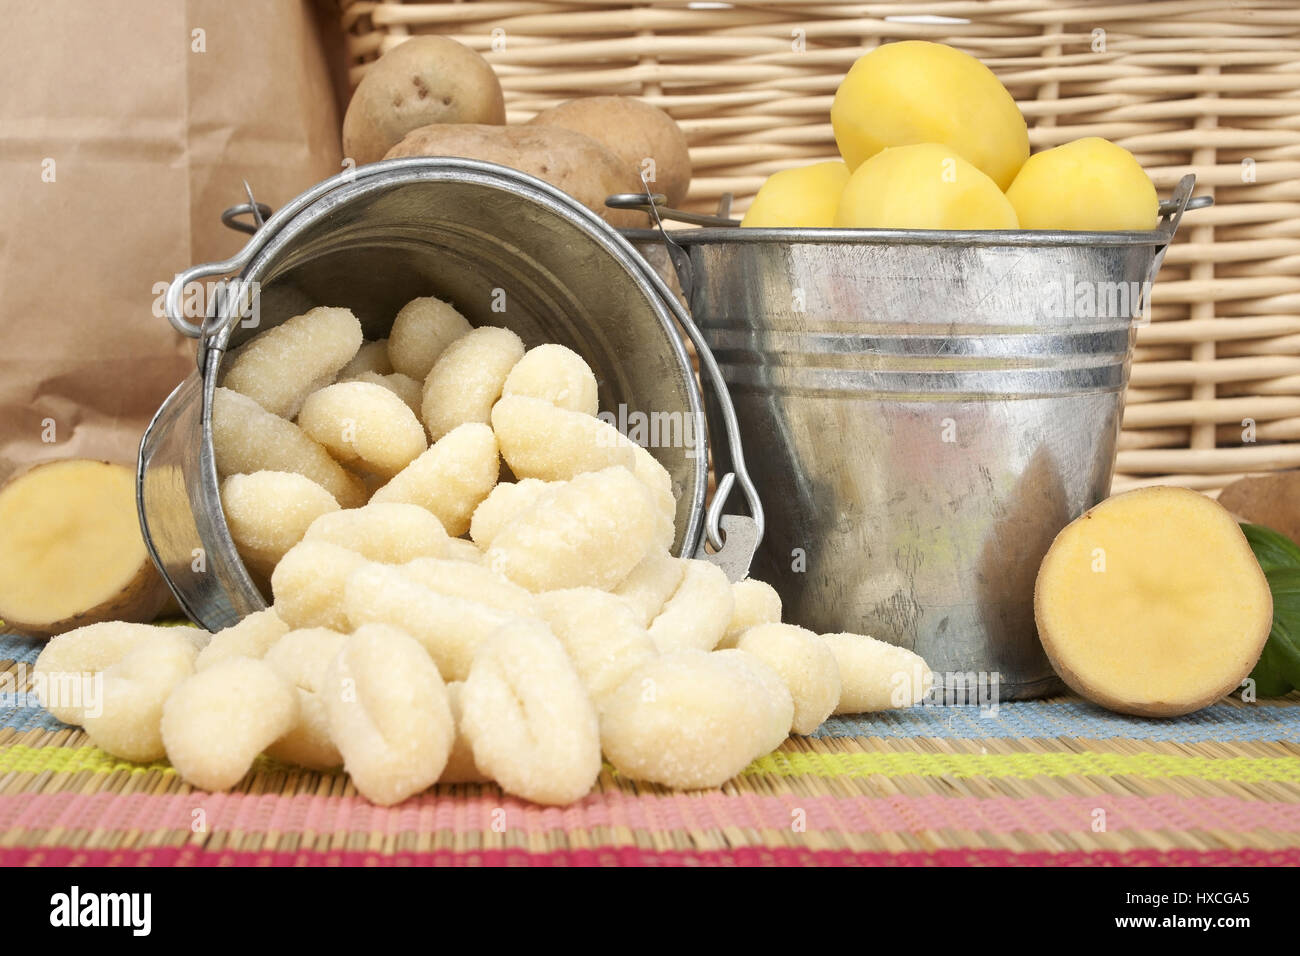 Cooked potatoes and Gnocchis, Boiled potatoes and gnocchi |, Gekochte Kartoffeln und Gnocchis |Boiled potatoes and gnocchi| Stock Photo